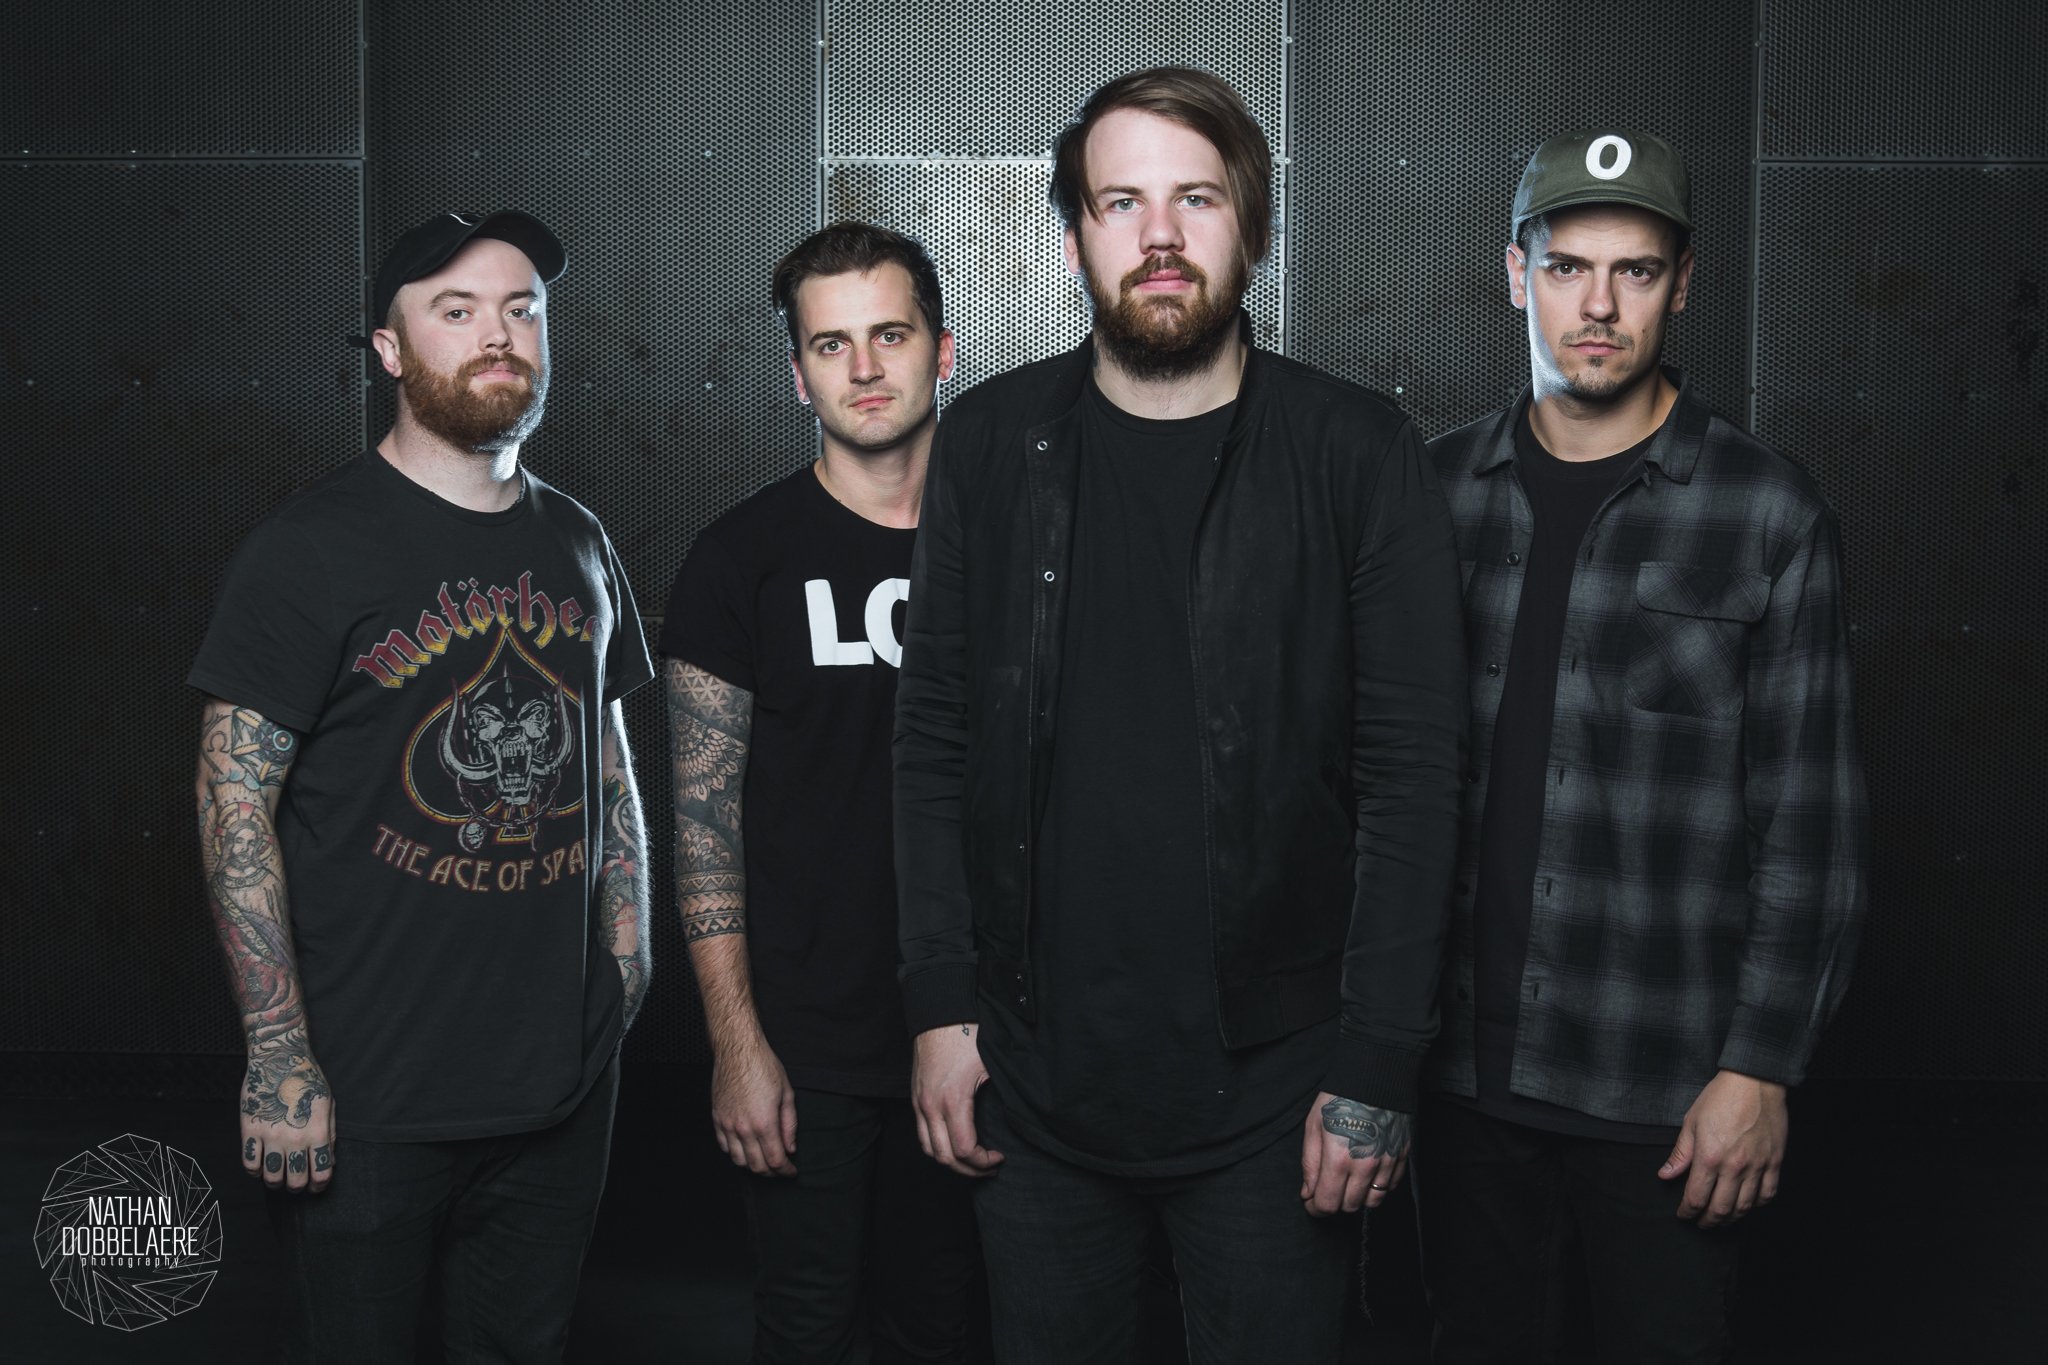 HD wallpaper of Beartooth band members posing together for a desktop background.